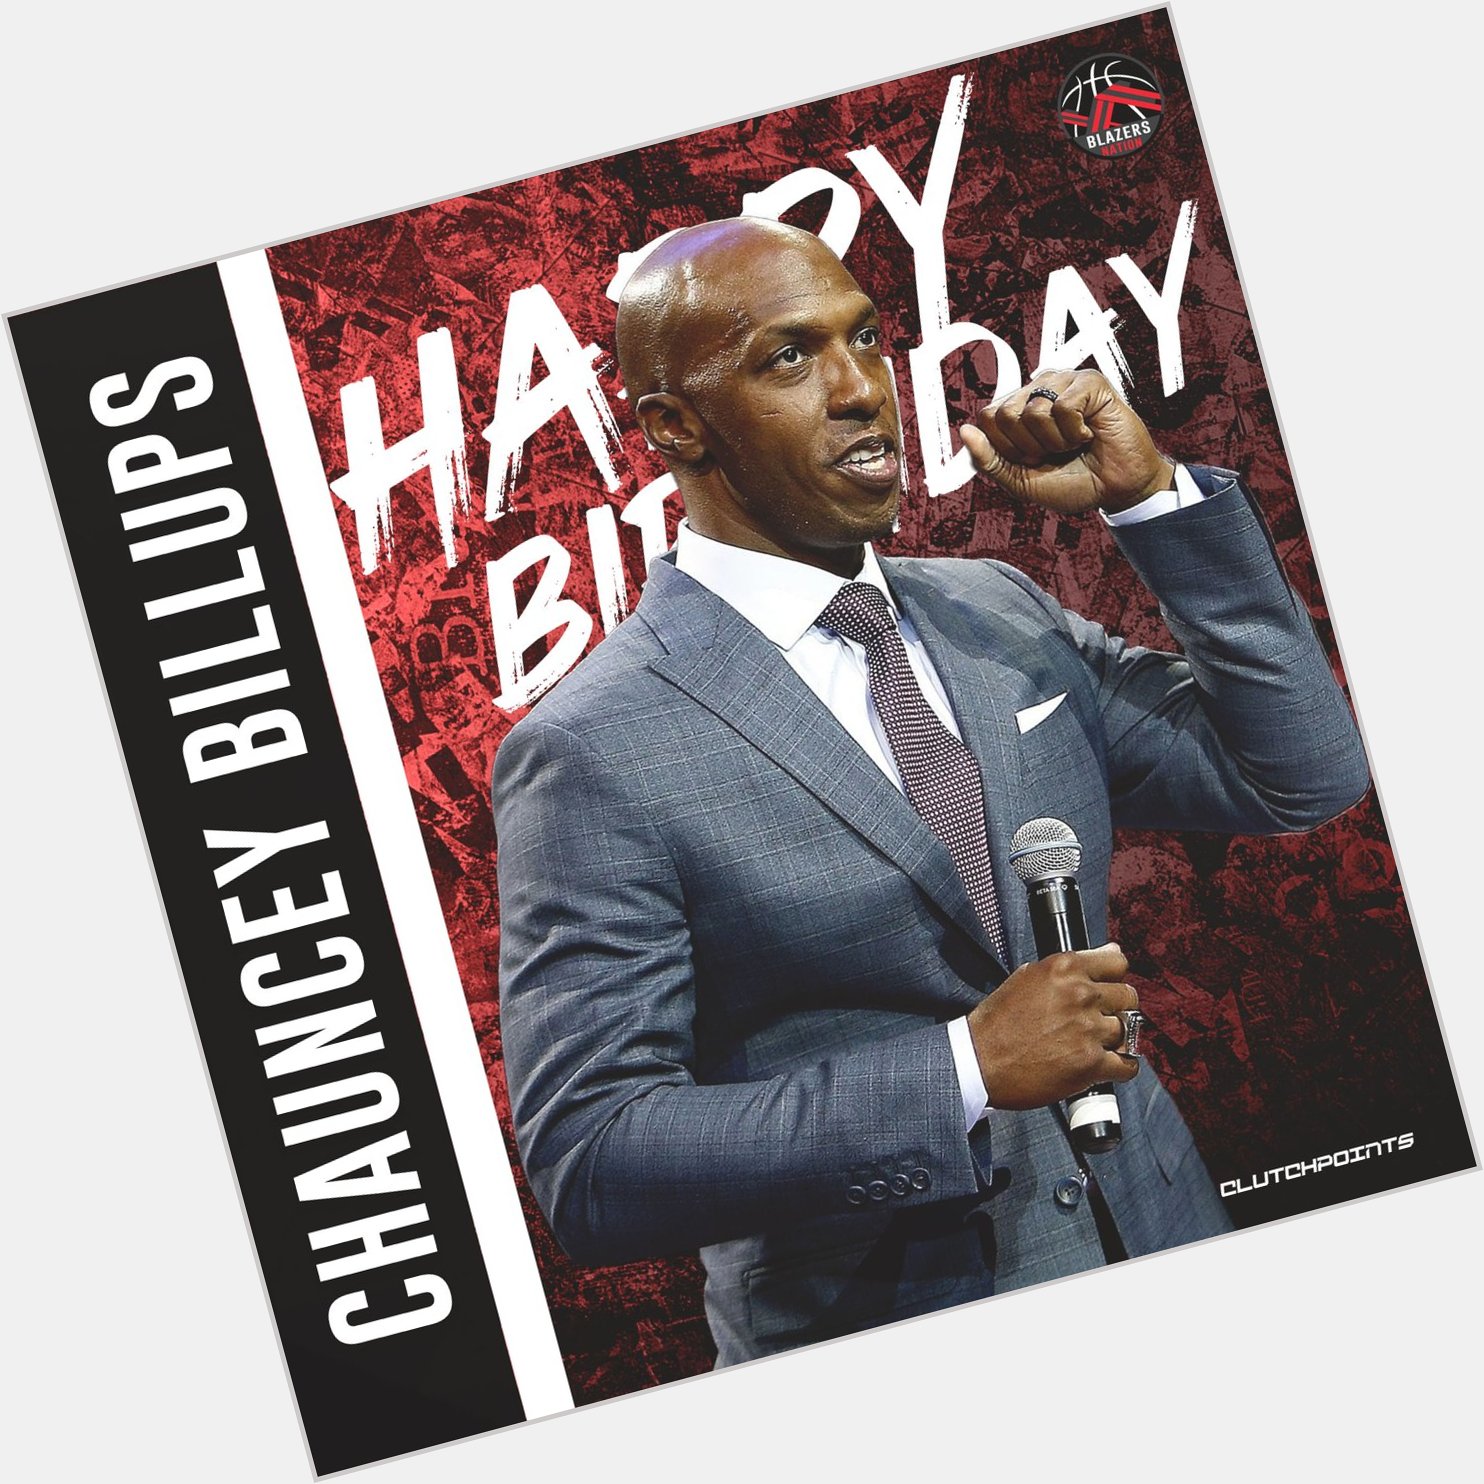 Join Blazers Nation in greeting our new head coach Chauncey Billups a happy 45th birthday!  